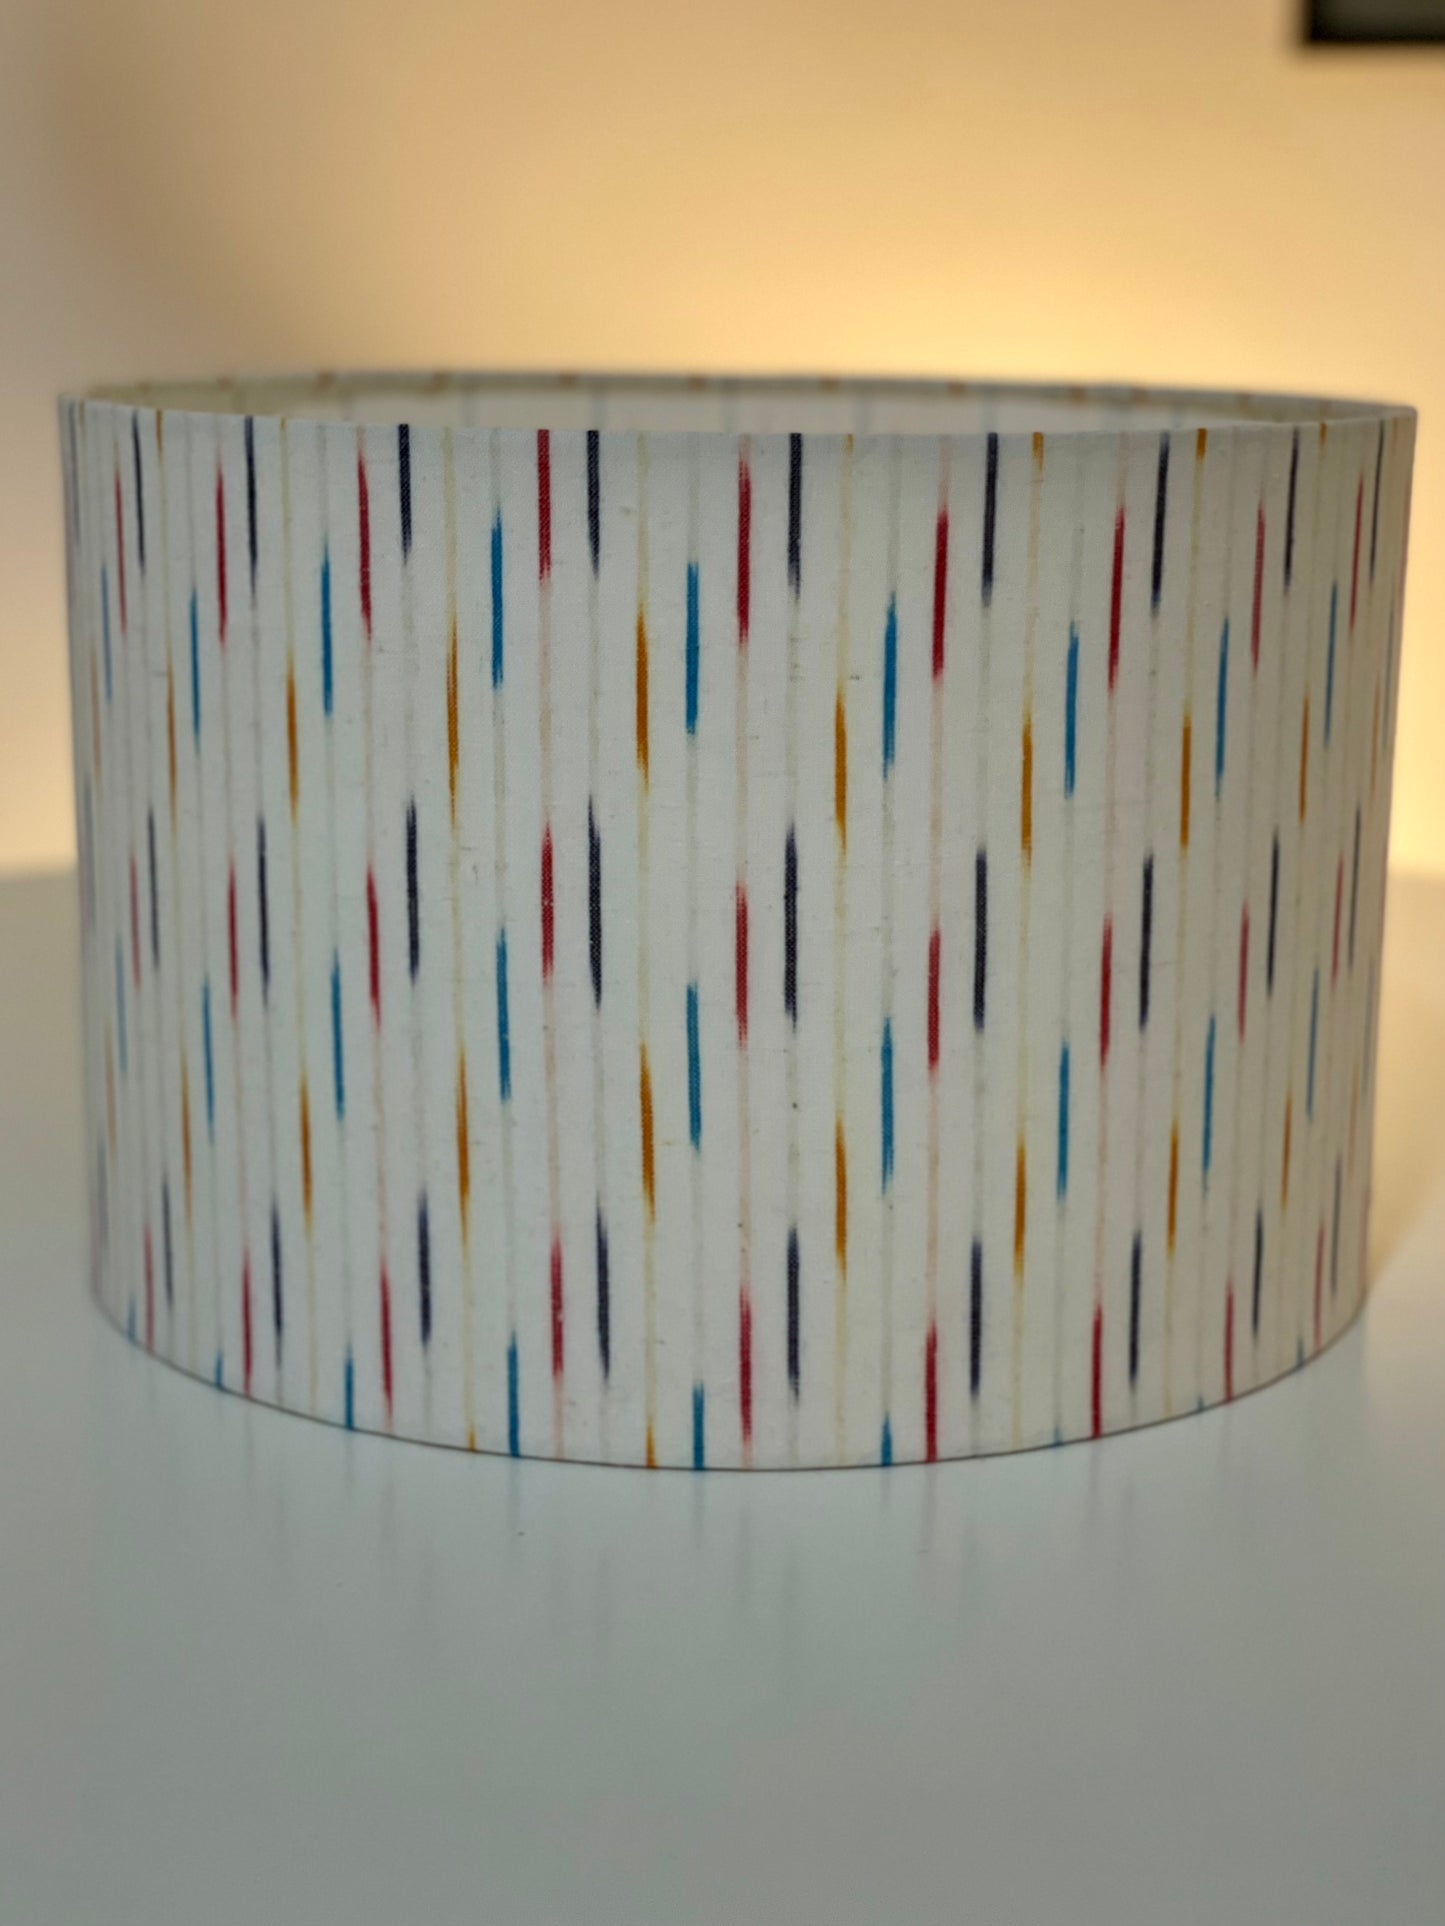 12 Inch Drum Lampshade. Indian Pochampally Ikat Weave Cotton Fabric. Multicolor and White.